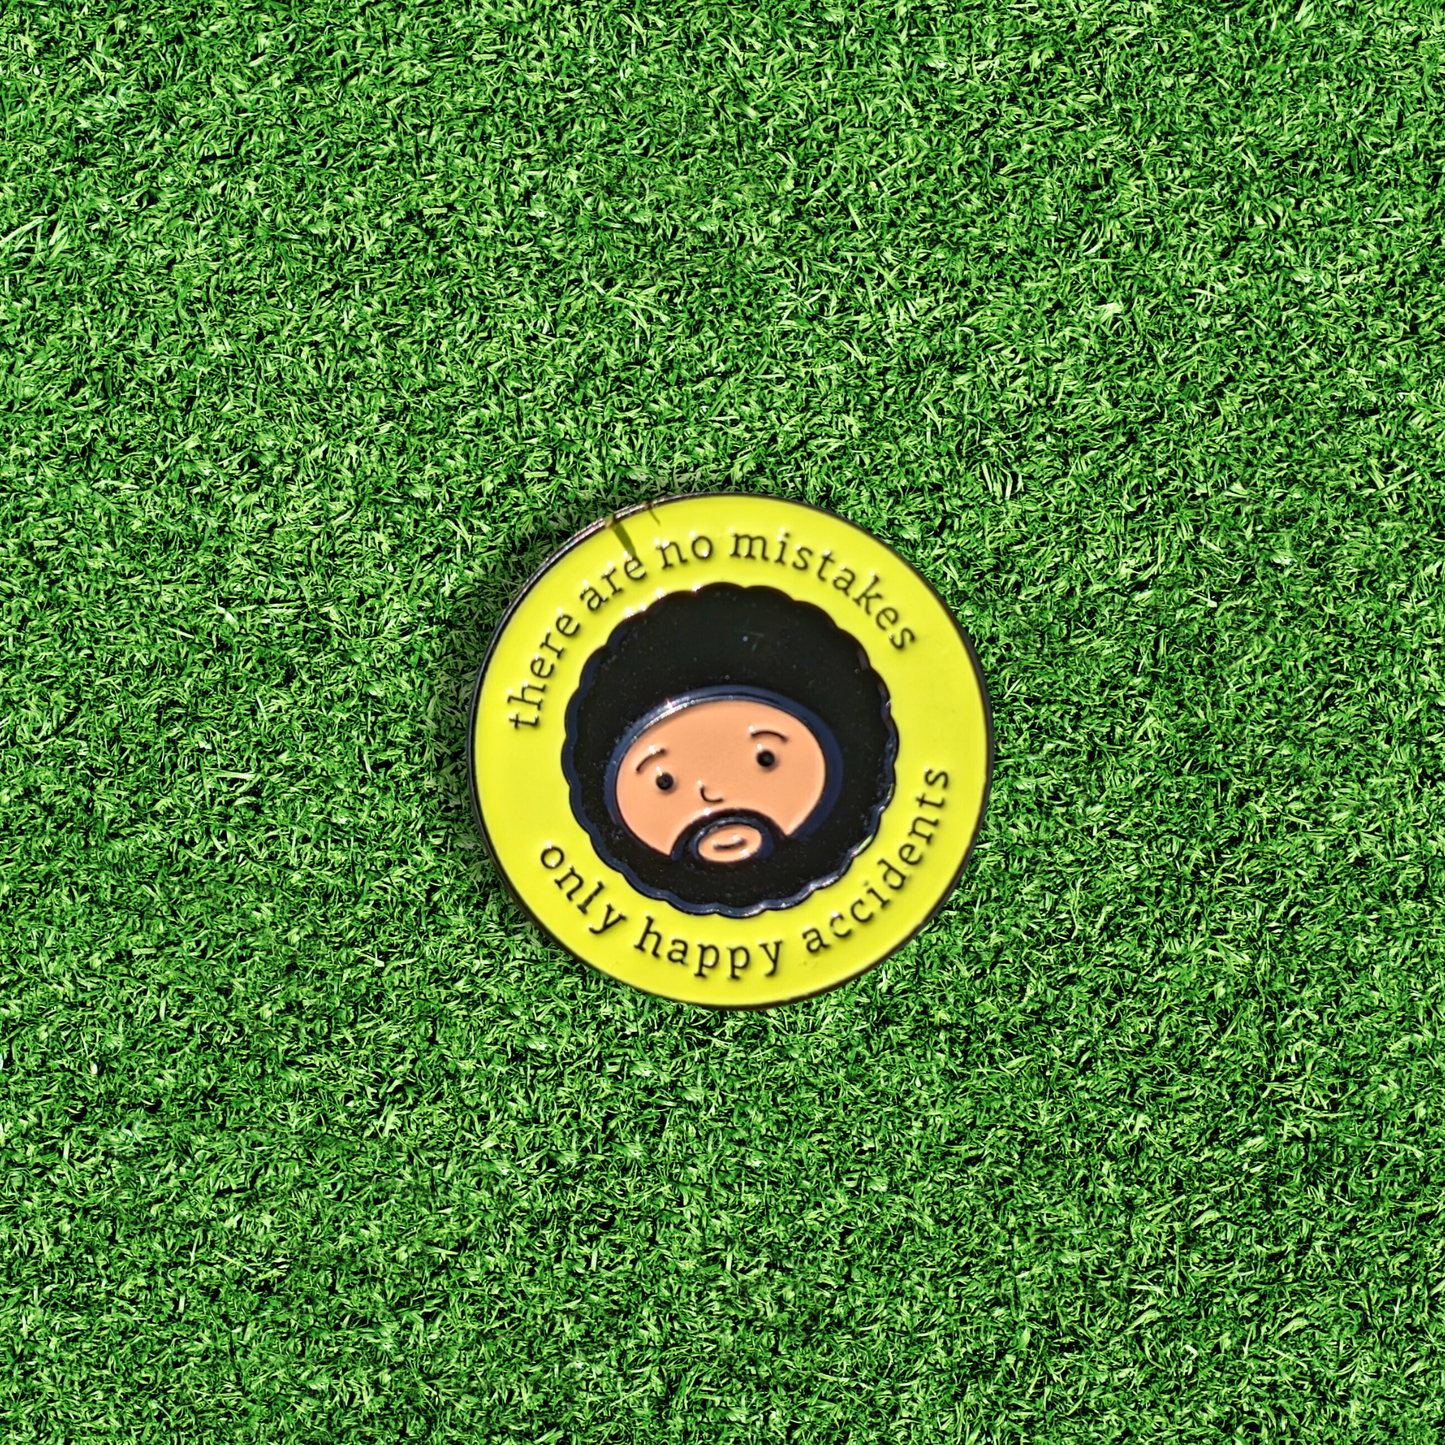 bob ross no mistakes only happy accidents golf ball marker